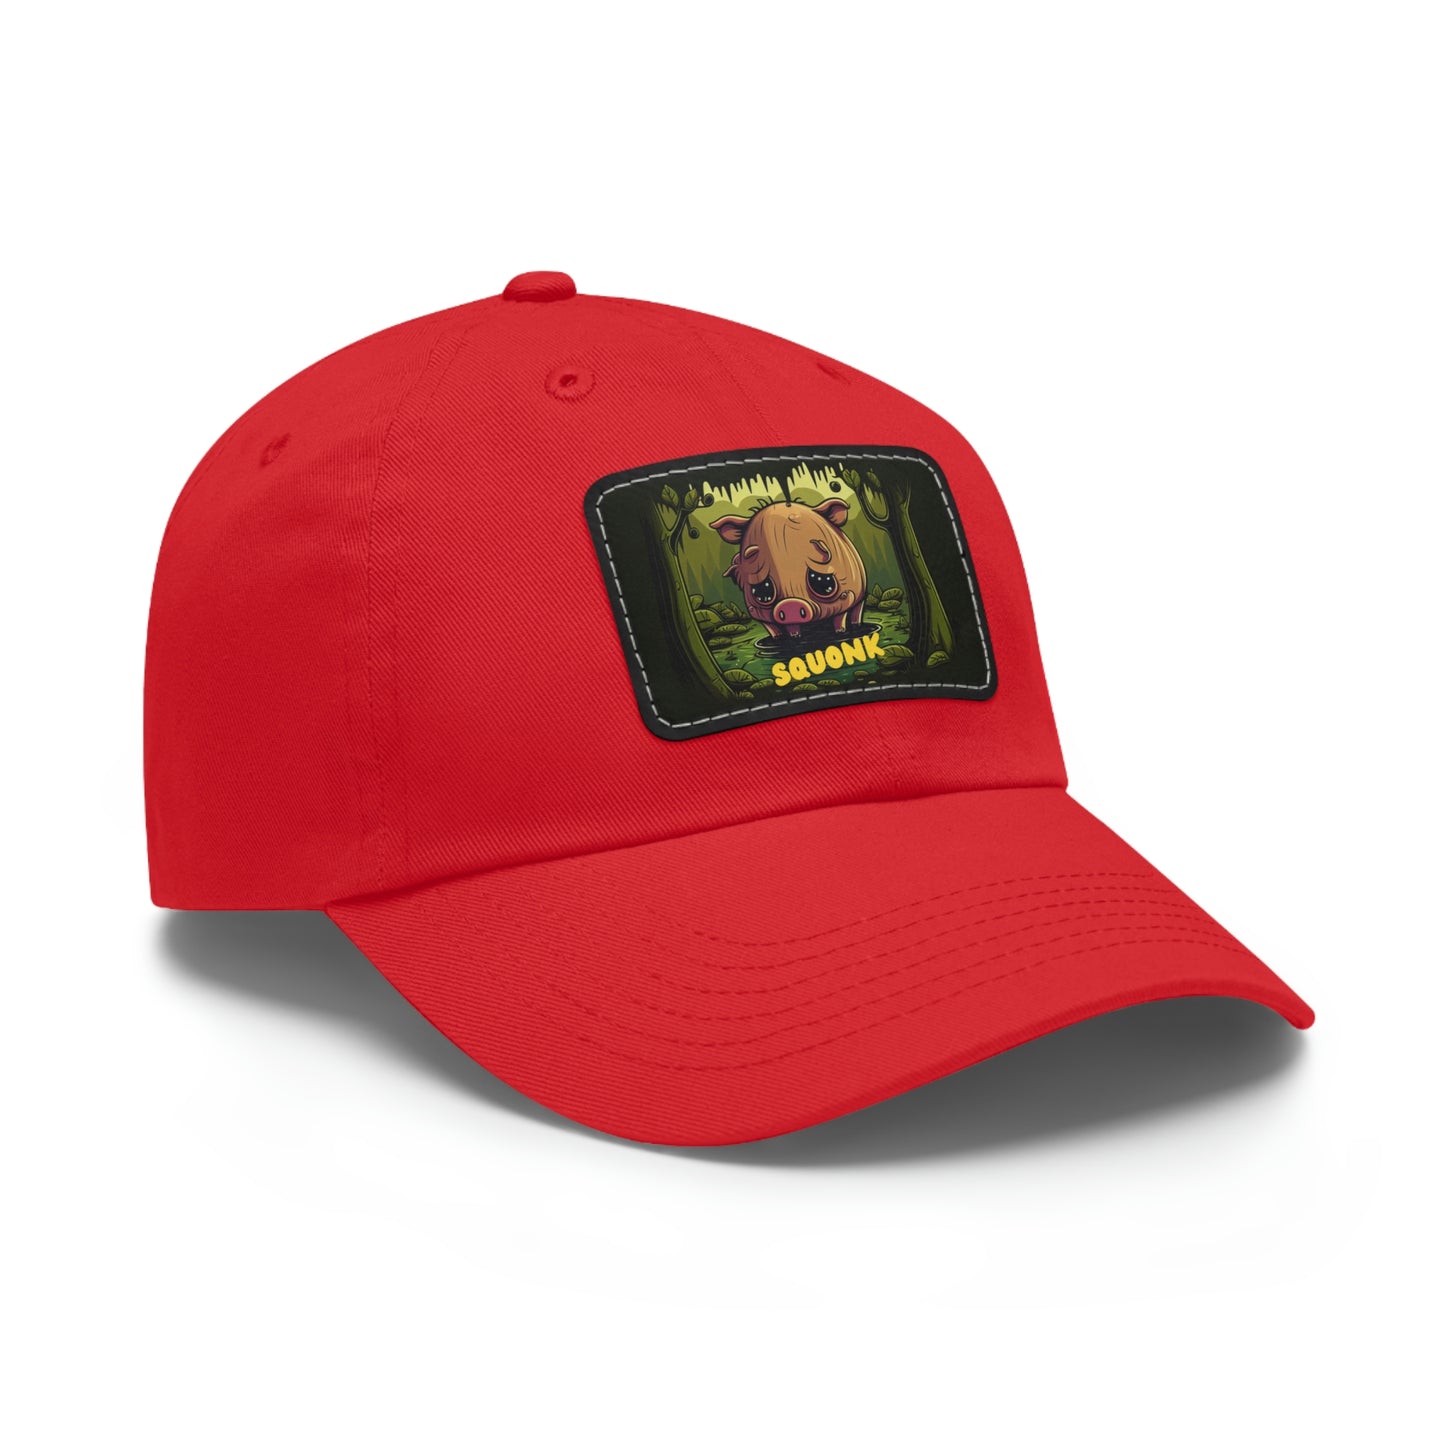 Shy Fellows Collection: Squonk Dad Hat